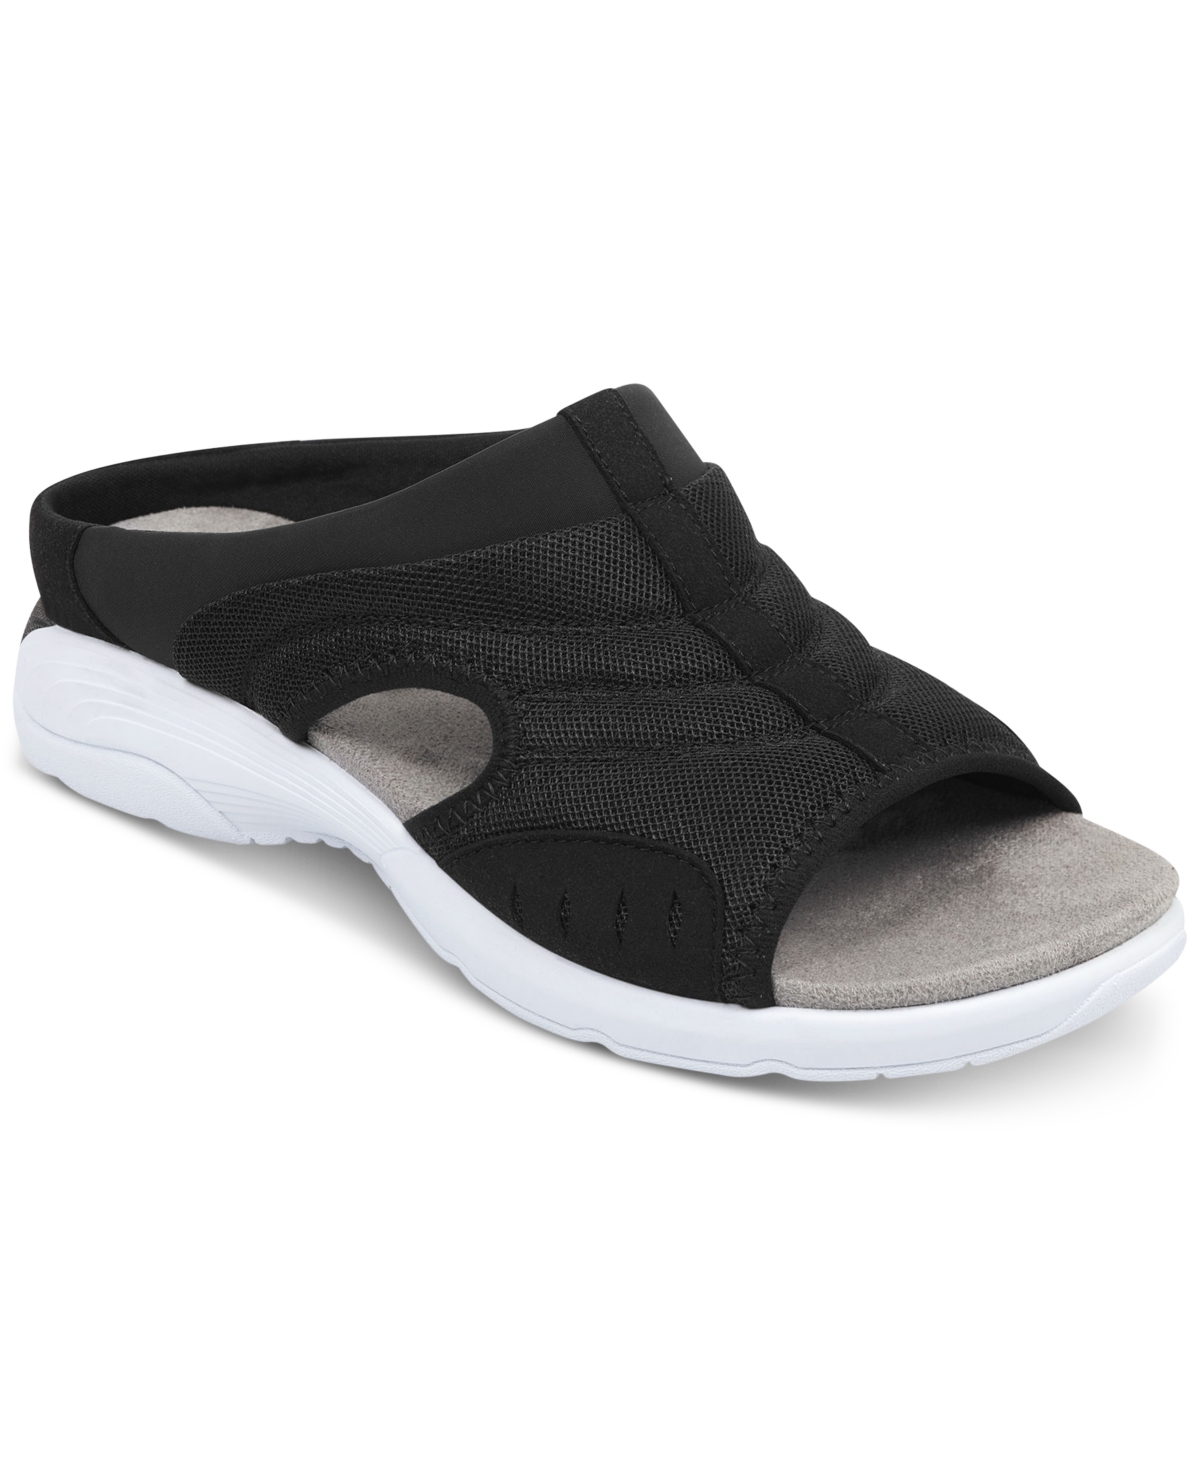 UPC 192733305115 product image for Easy Spirit Women's Traciee Square Toe Casual Flat Sandals Women's Shoes | upcitemdb.com